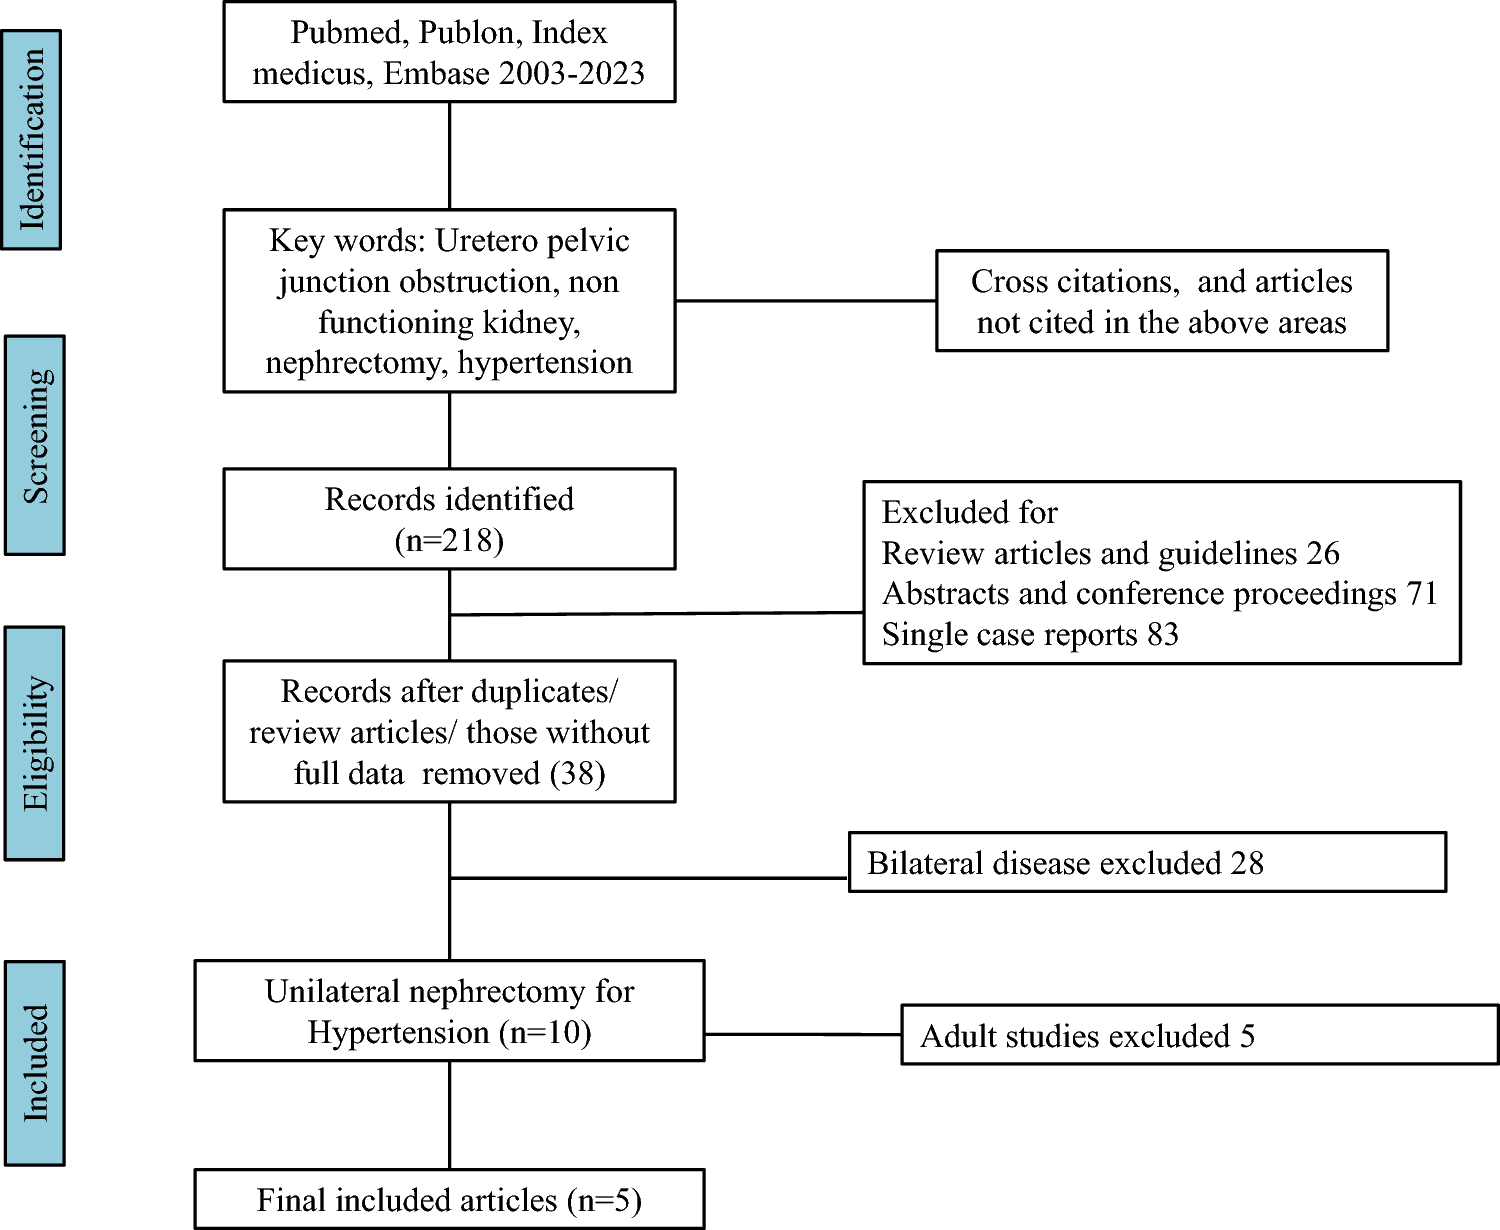 How effective is nephrectomy in curing hypertension in children with unilateral poorly functioning kidney? A systematic review